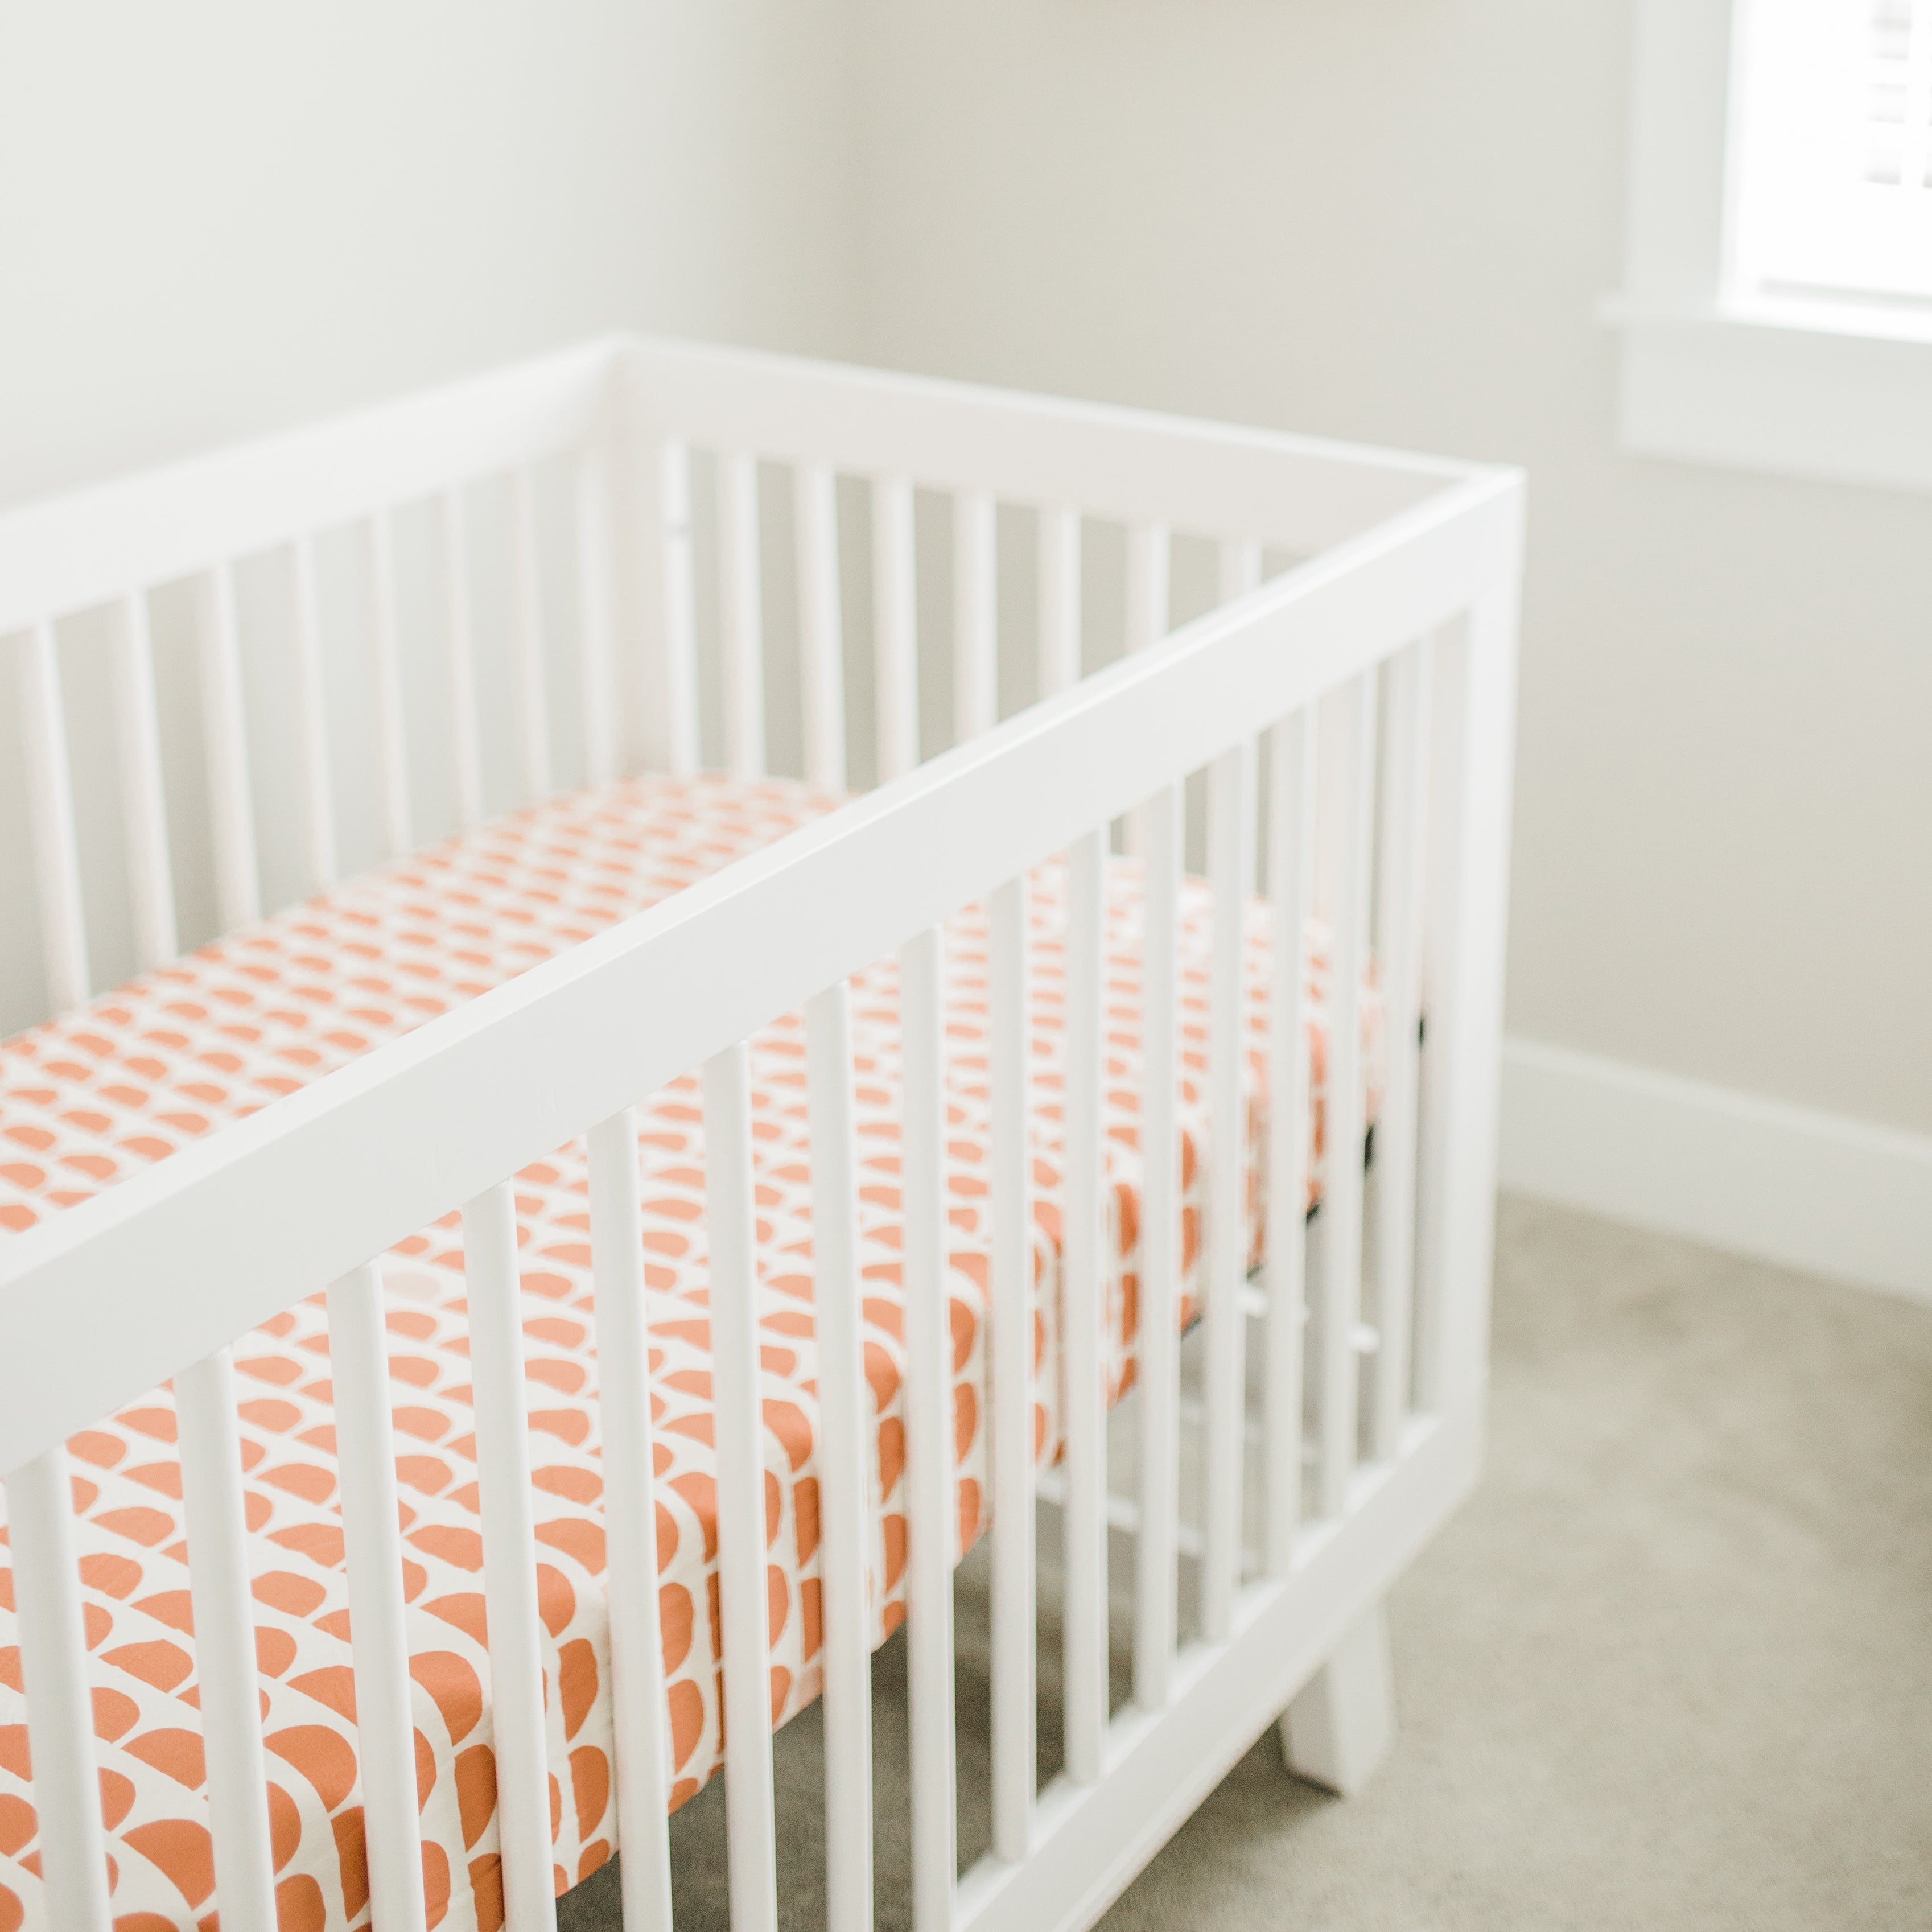 An Oolie organic cotton crib sheet with red graphic print installed on a mattress in a white crib in a baby's room.